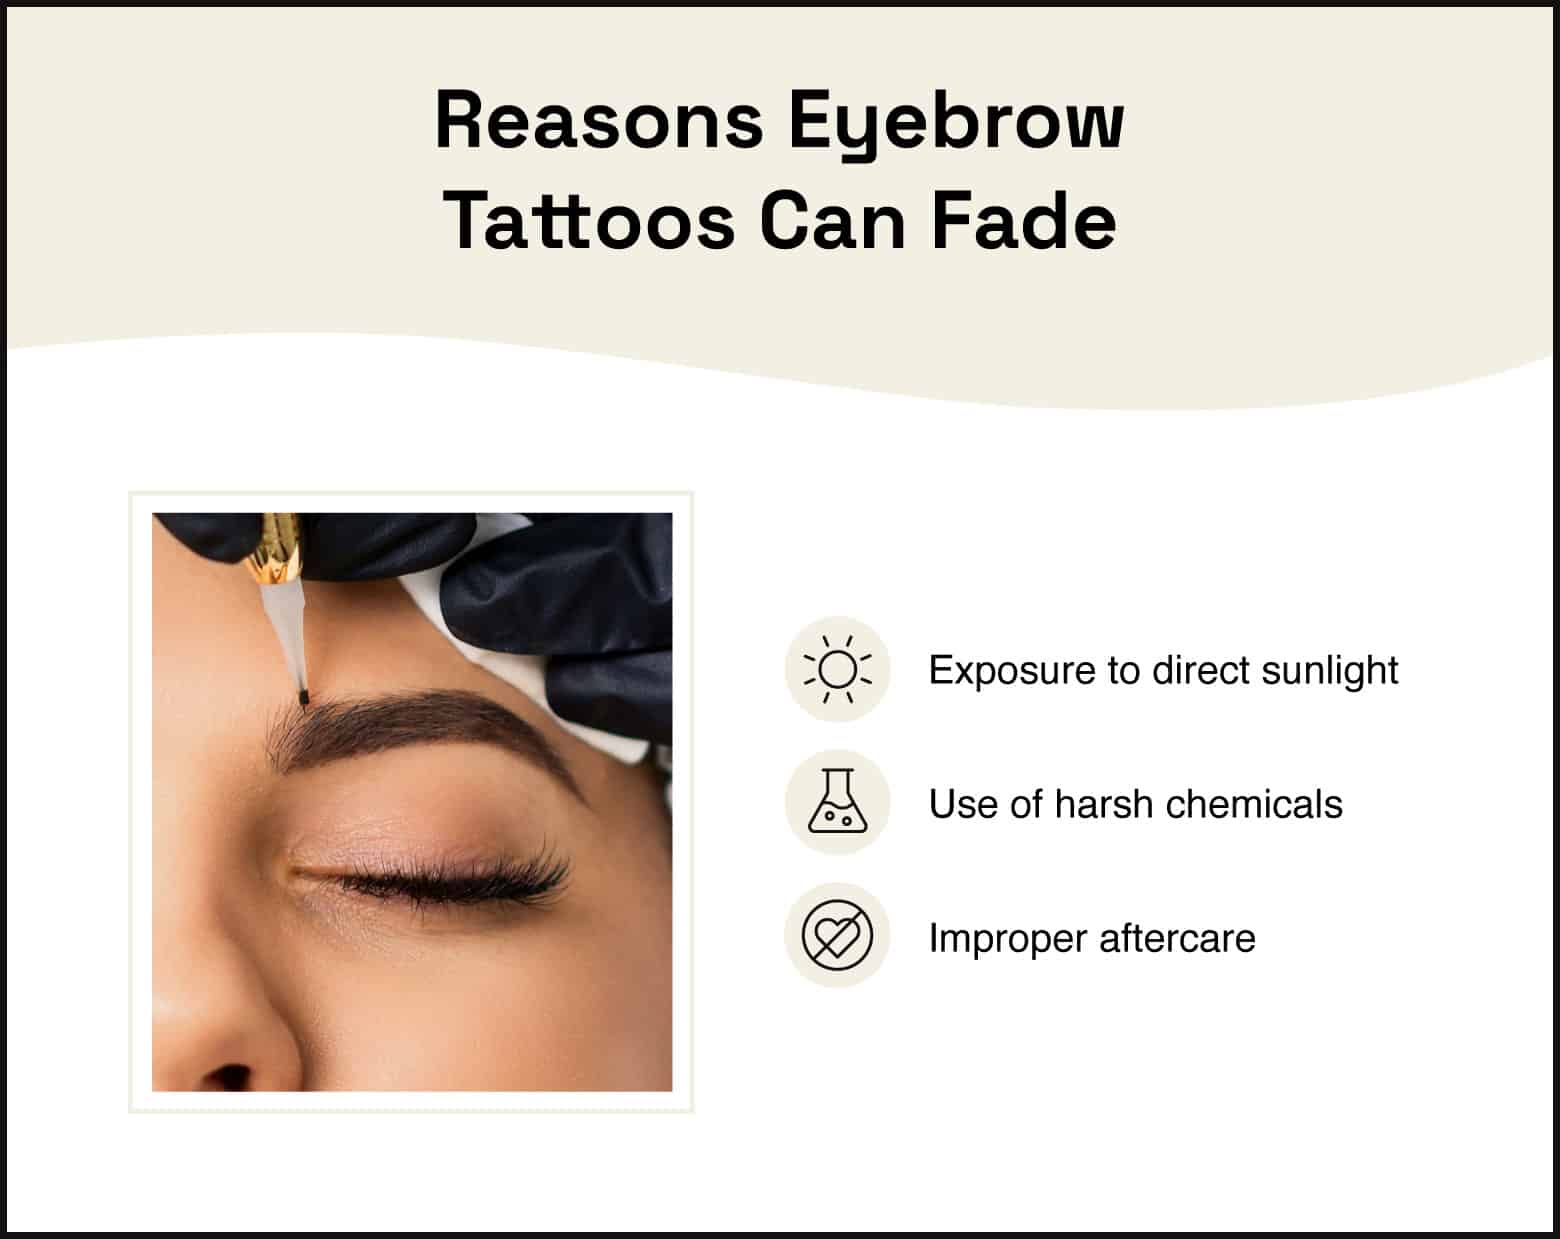 How Much Do Eyebrow Tattoos Cost? - StyleSeat